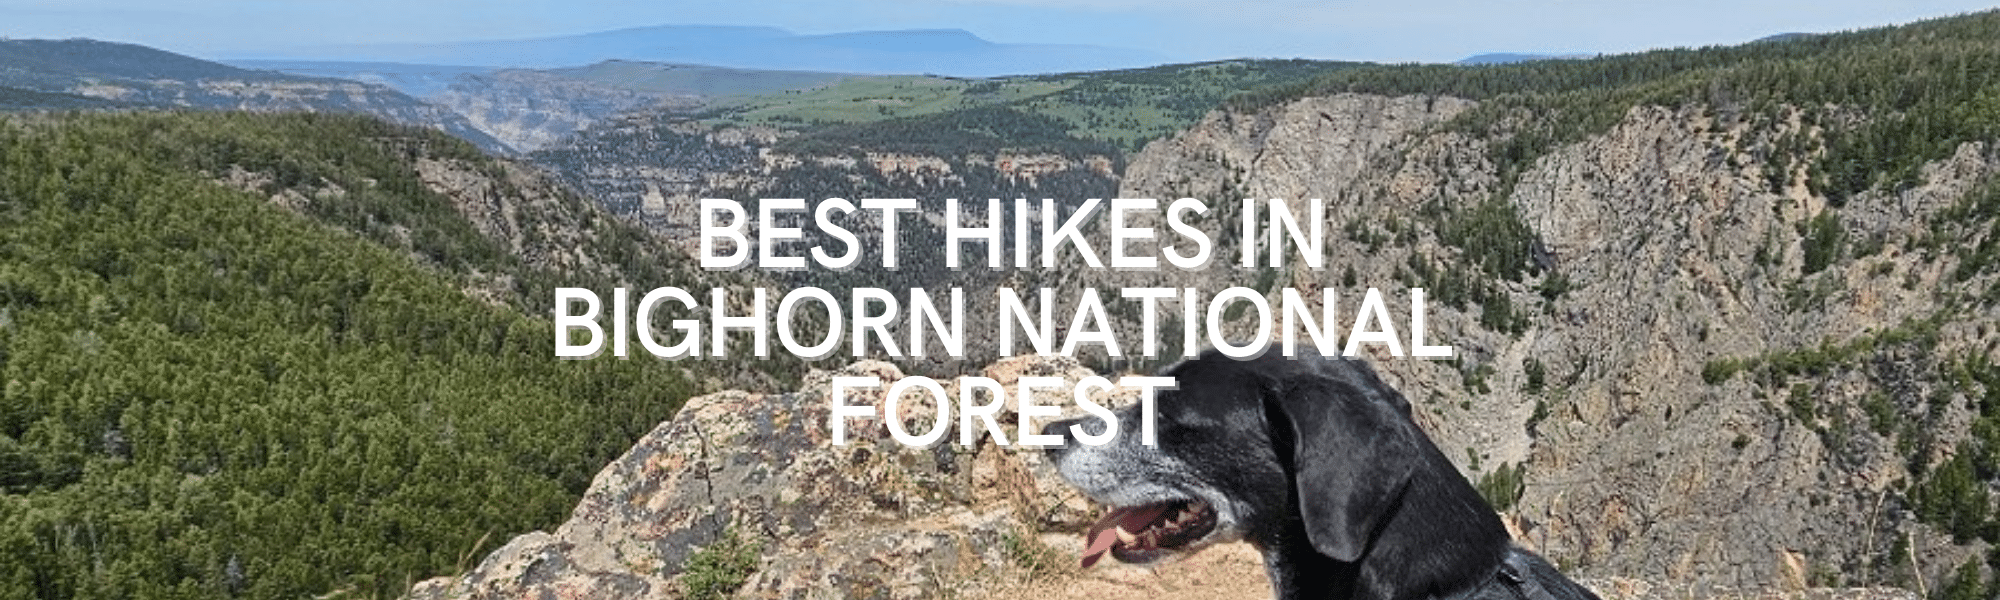 Best Hikes in Bighorn National Forest